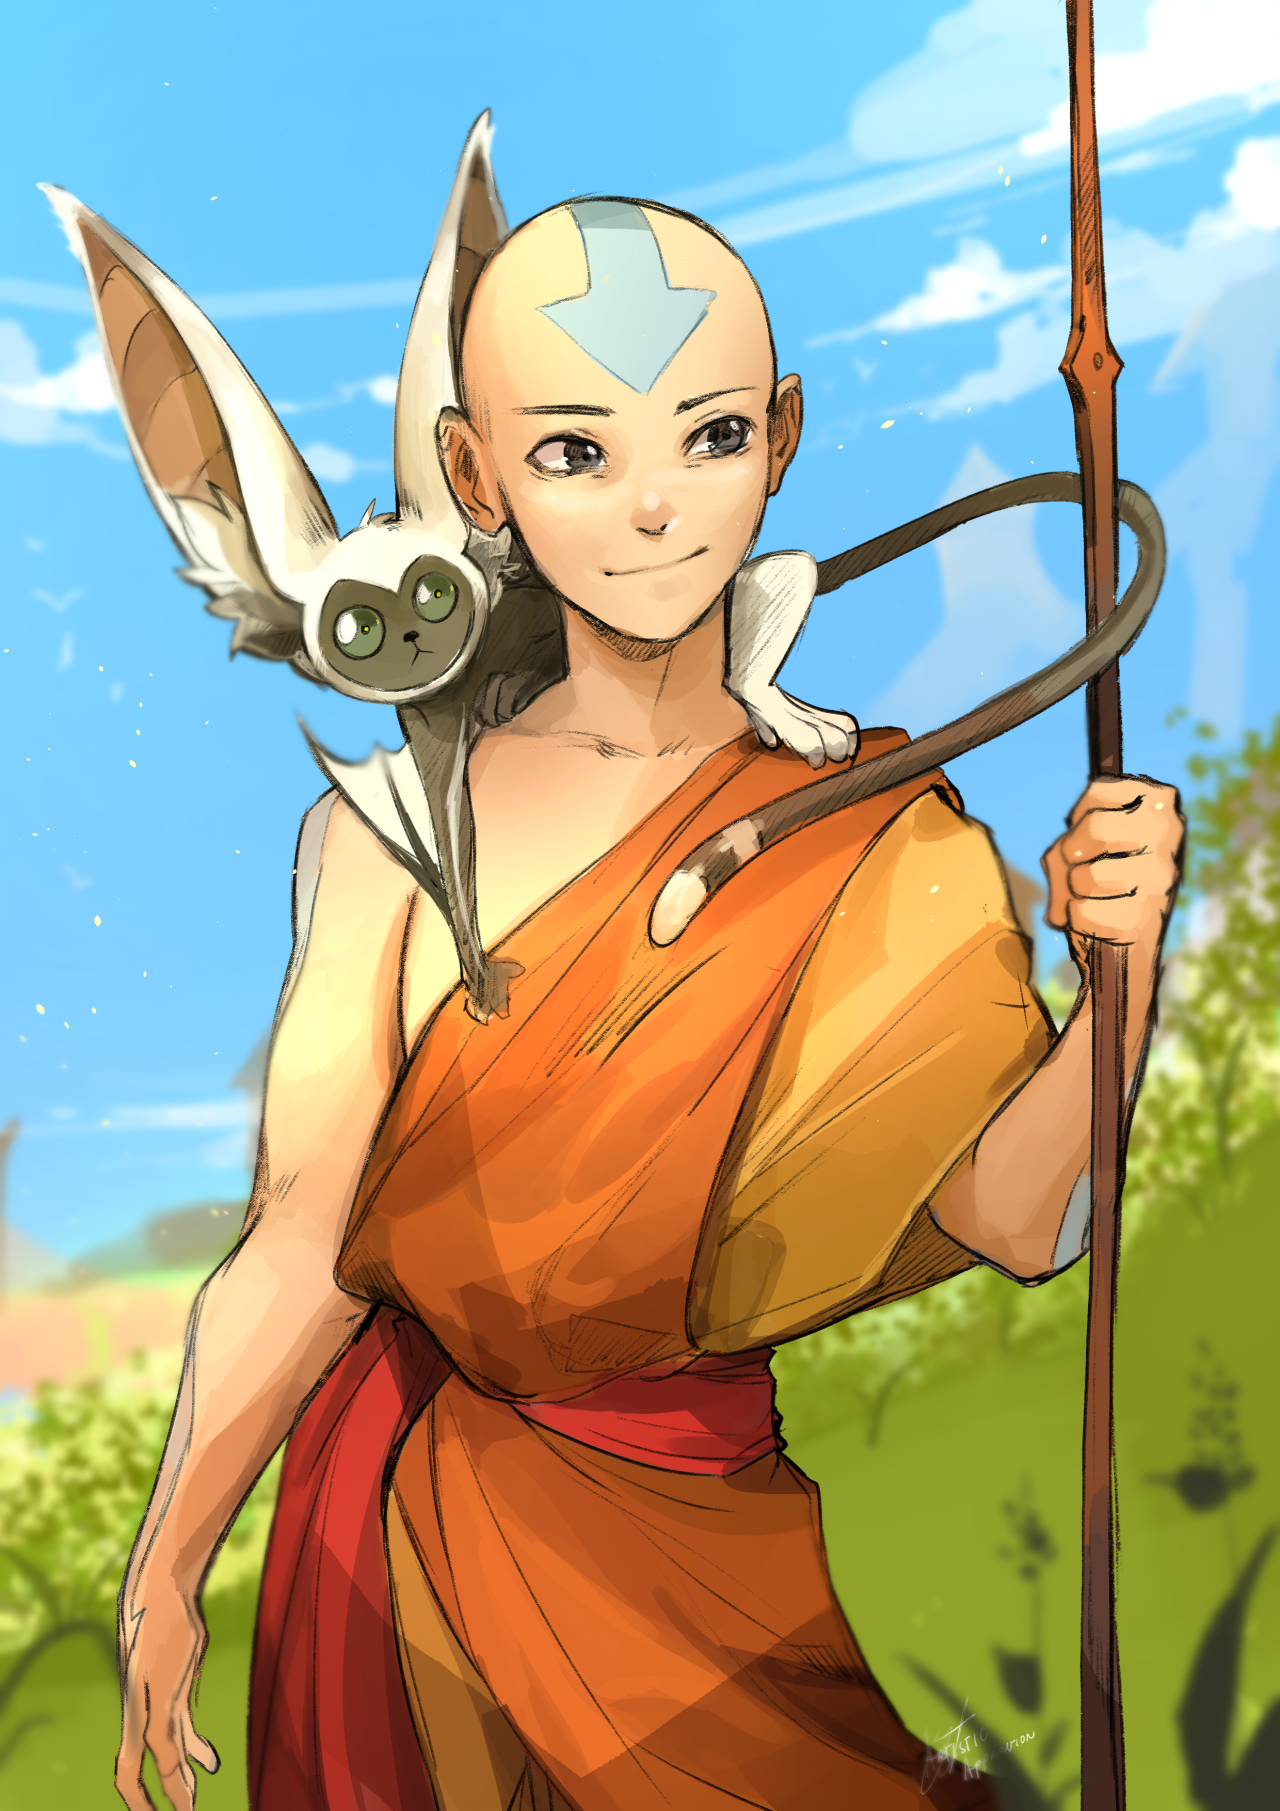 Theartisticapparitionmy Favorite Protagonist Heres A Sketch Of Aang